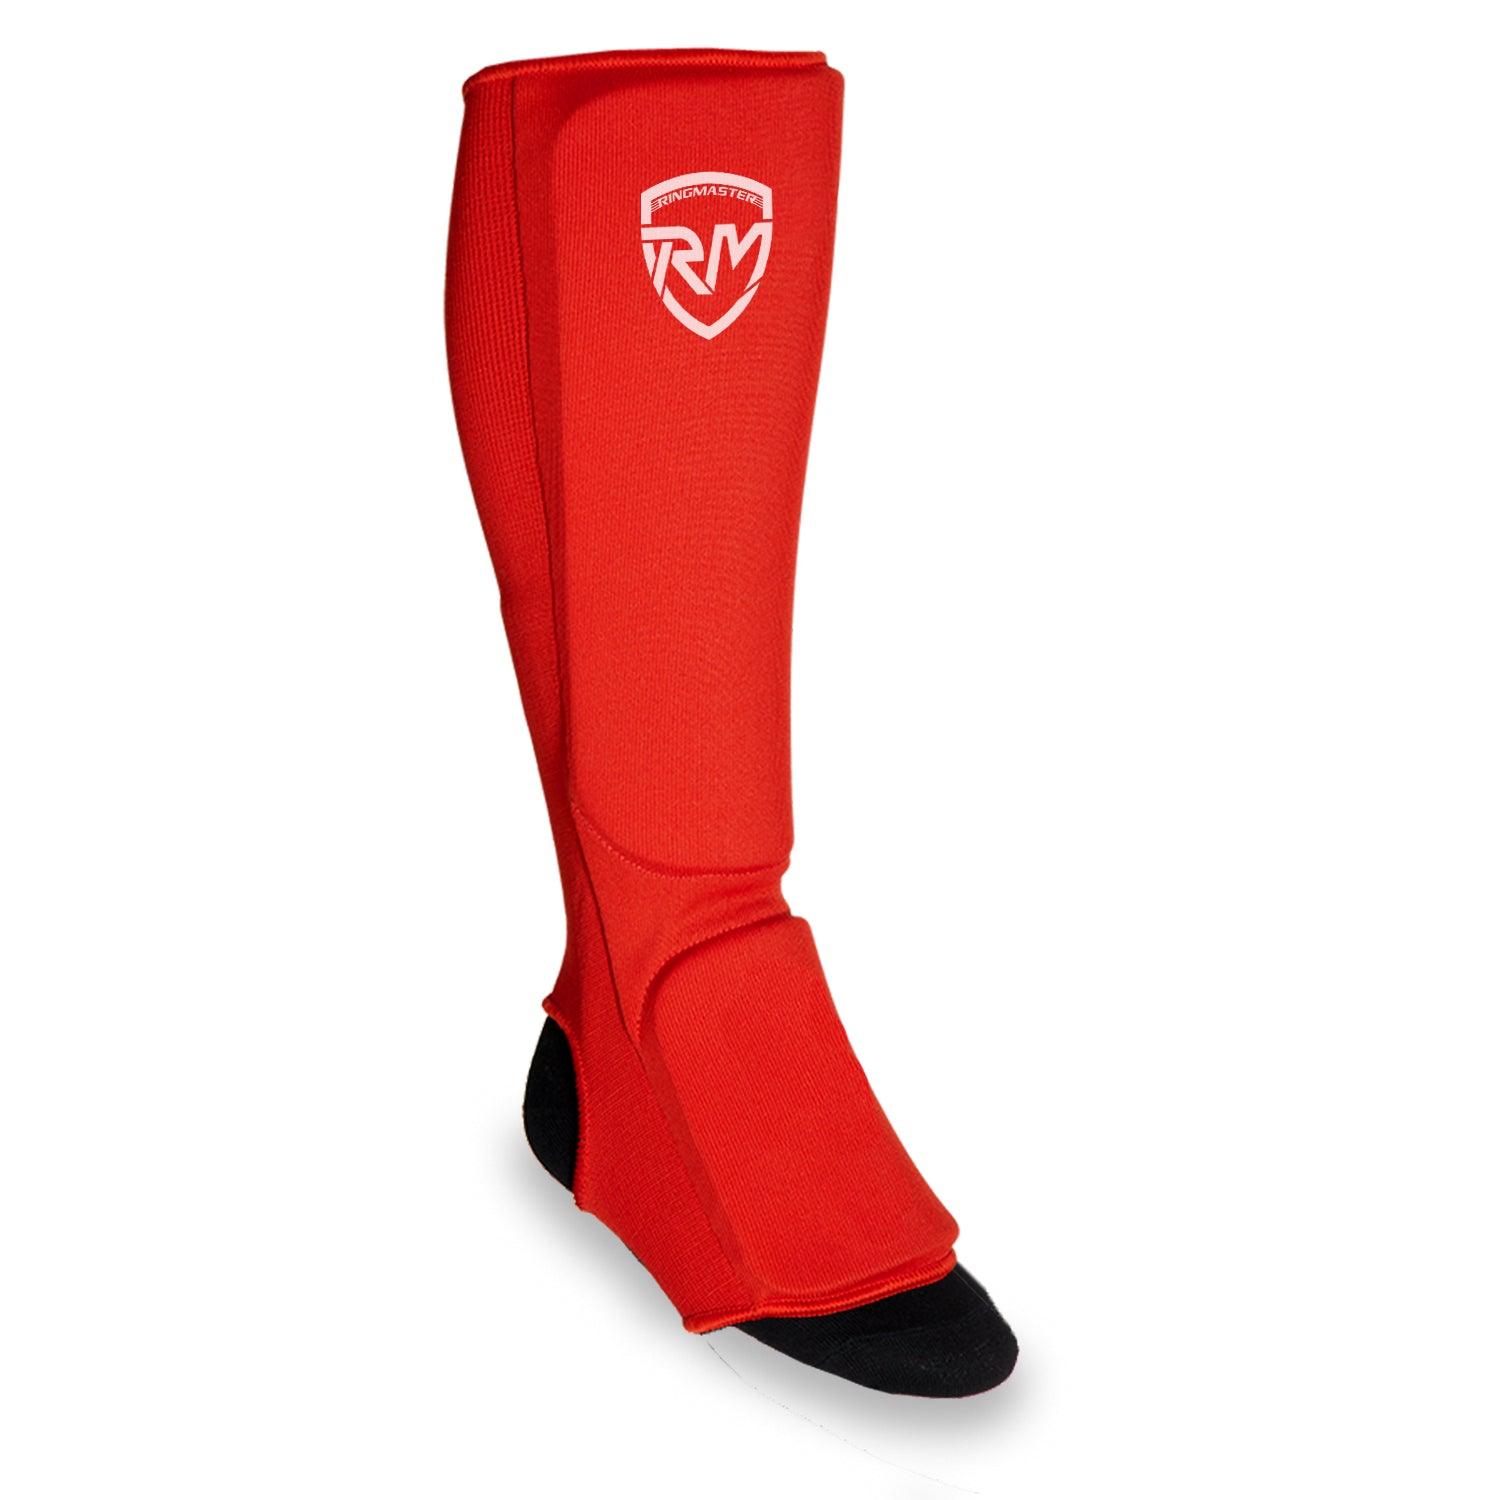 RingMaster Sports Slip-on Elastic Shin & Instep Guards Red - RINGMASTER SPORTS - Made For Champions